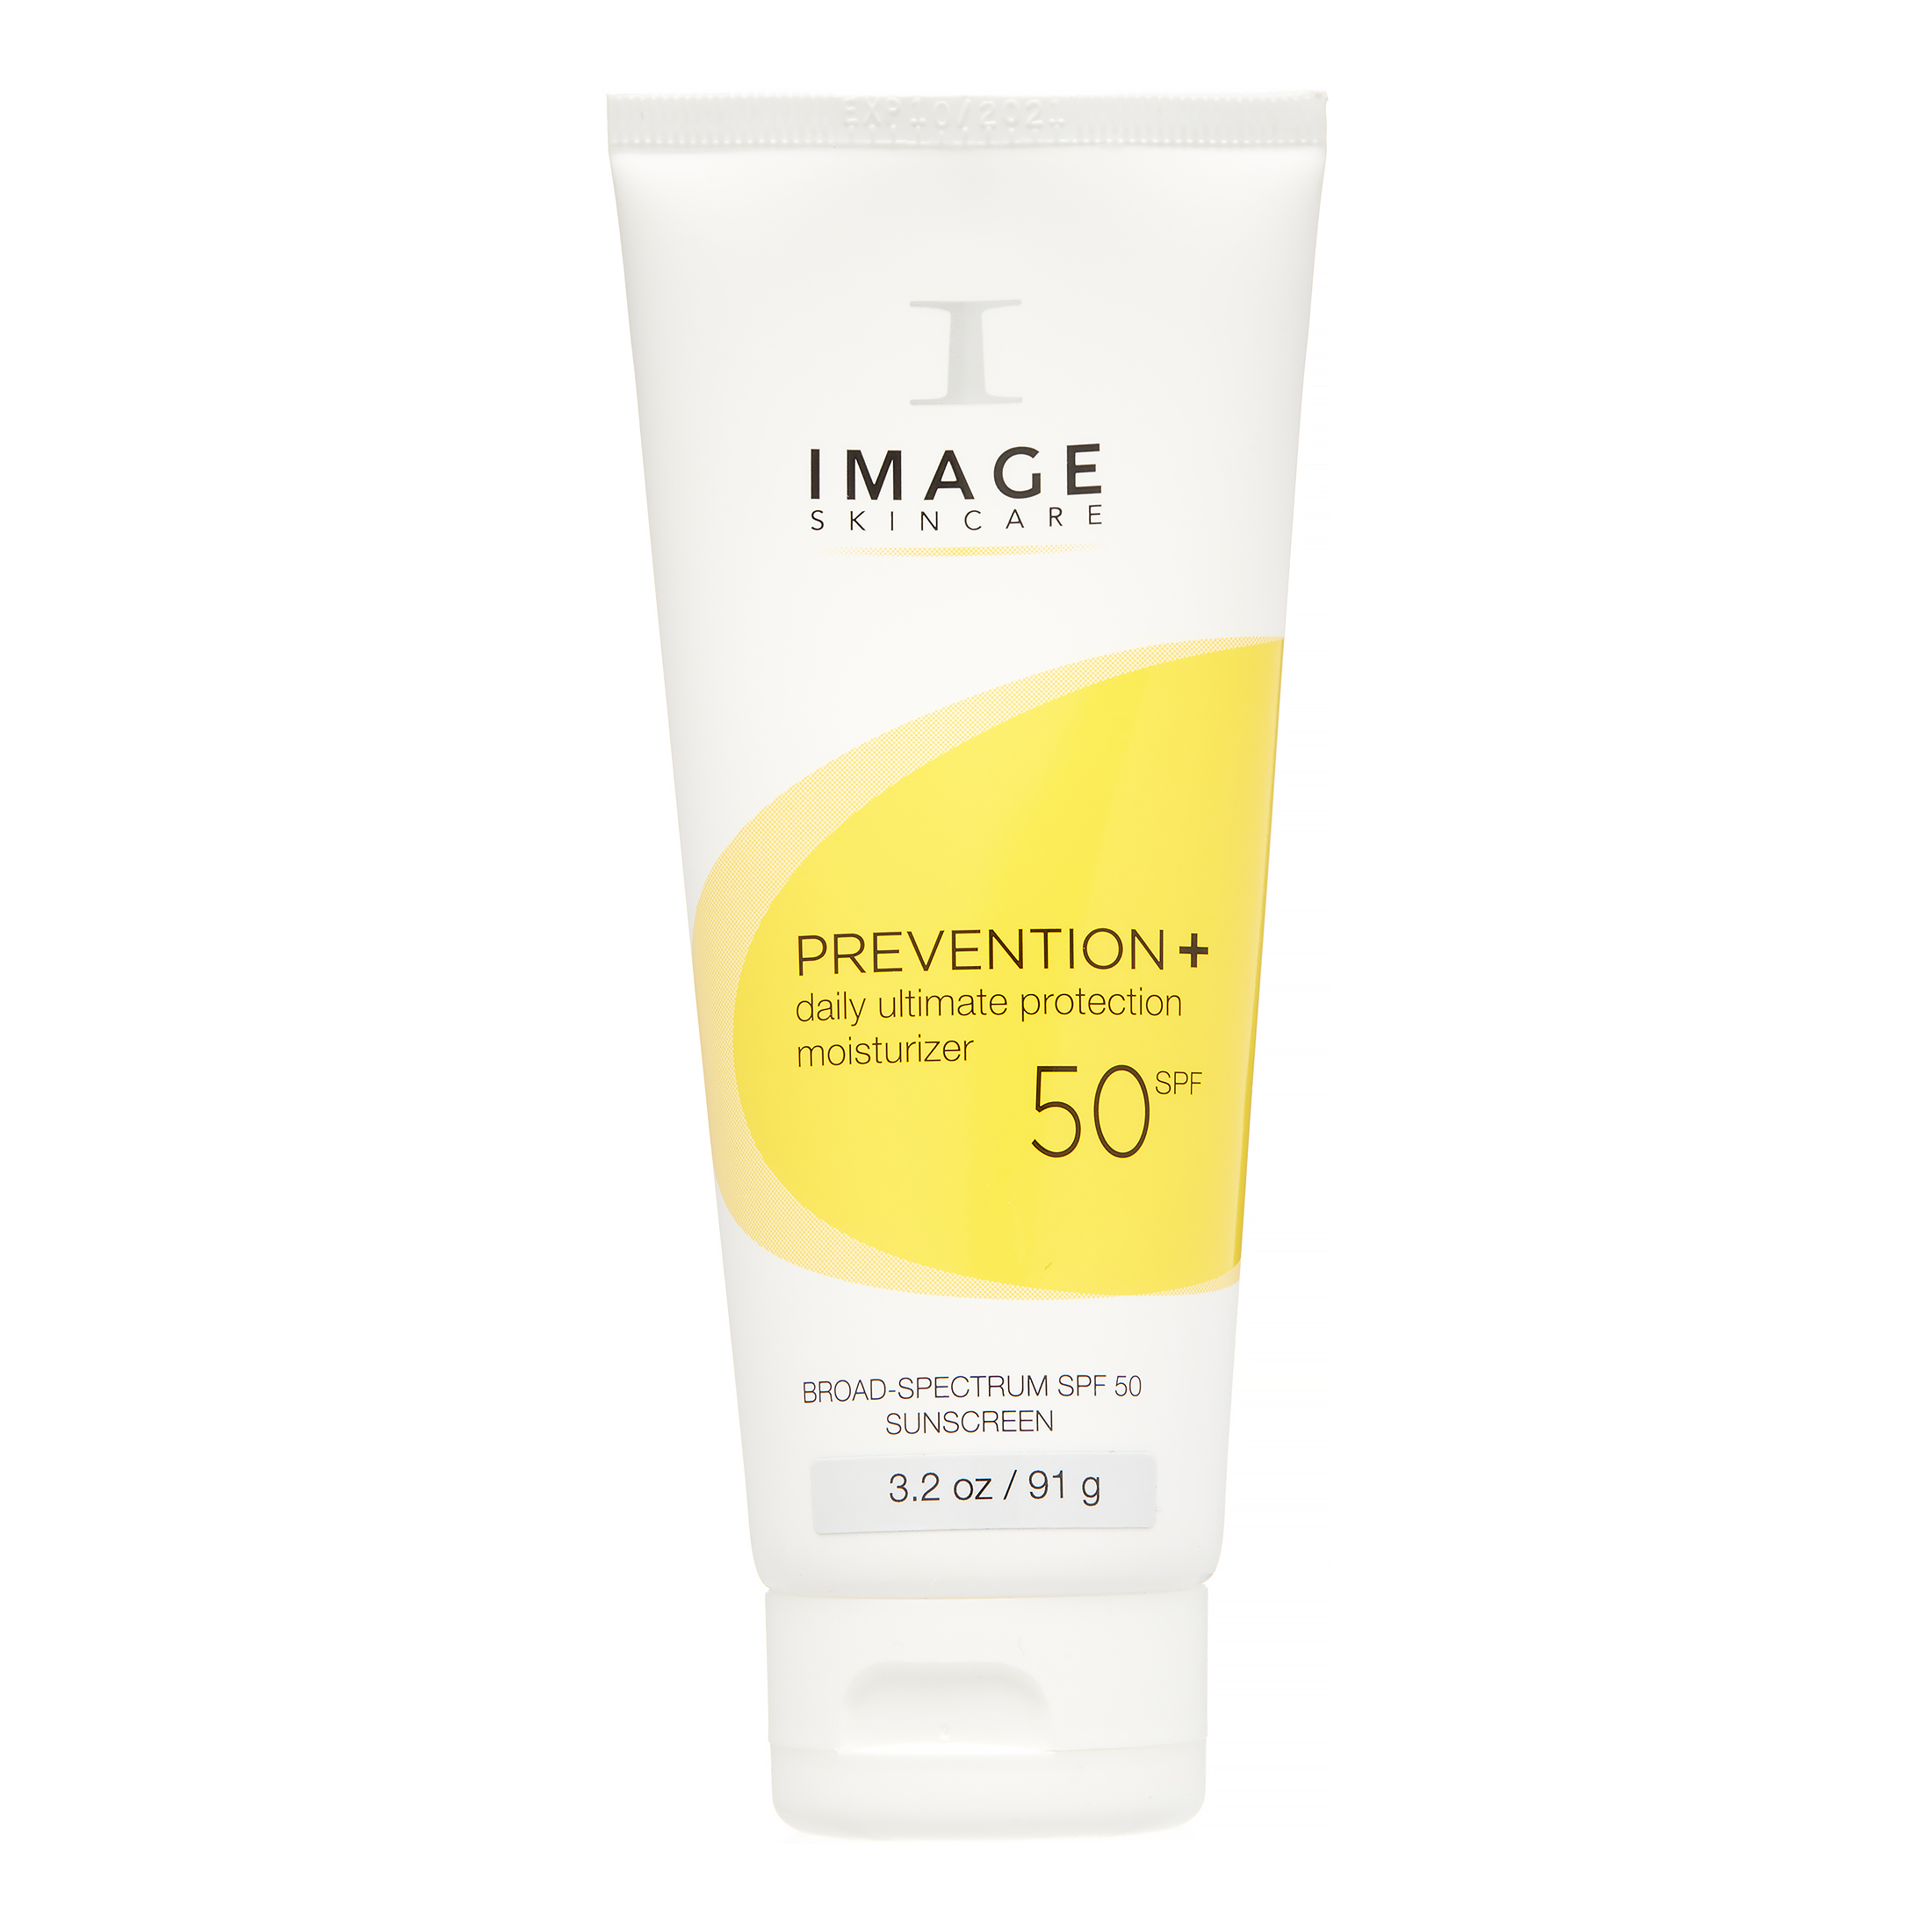 IMAGE Skincare Prevention+ Daily Ultimate Protection Moisturizer Sunscreen, SPF 50, 3.2 Oz